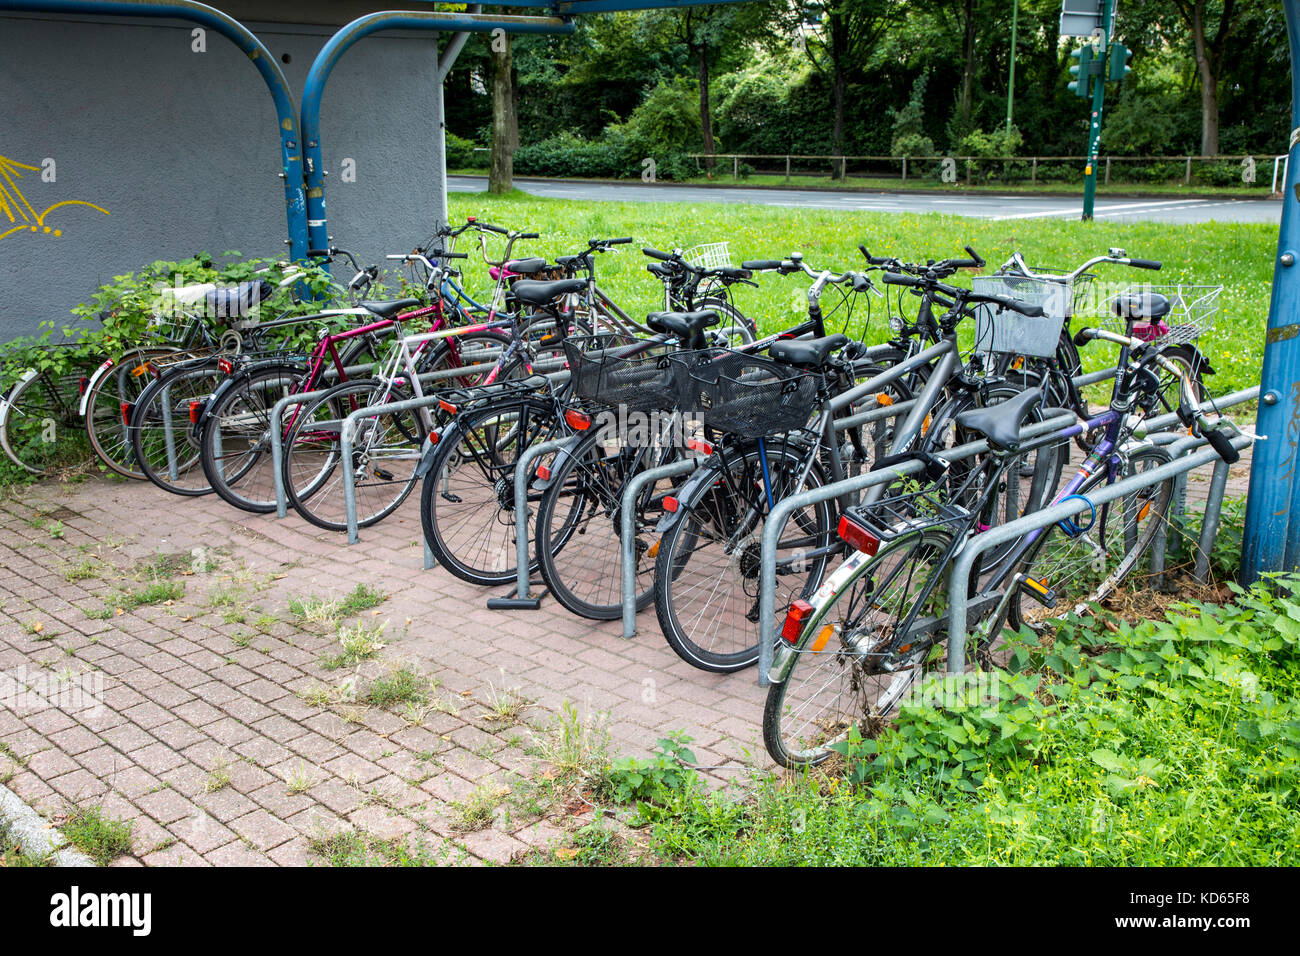 Bicycle parking stands in a city, many bikes are parked here, Stock Photo